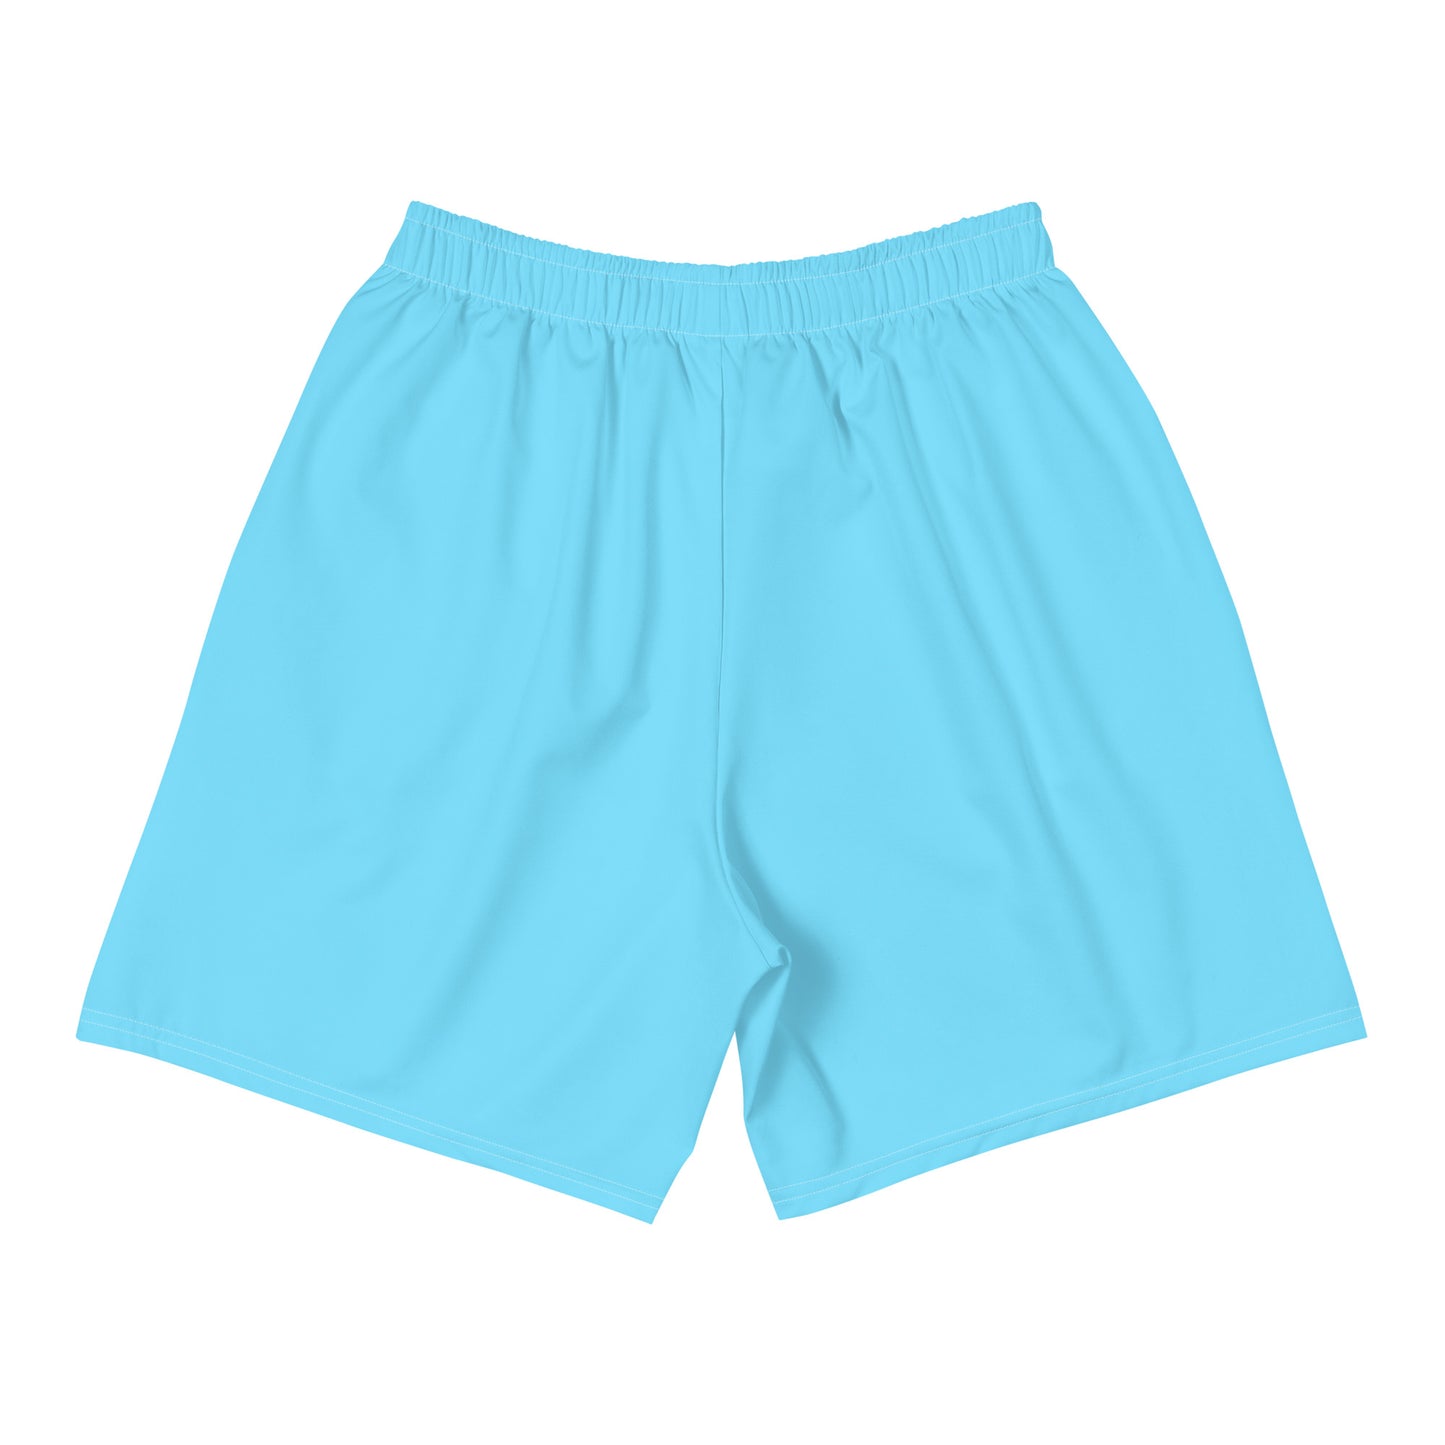 Caribbean Blue Men's Recycled Athletic Shorts